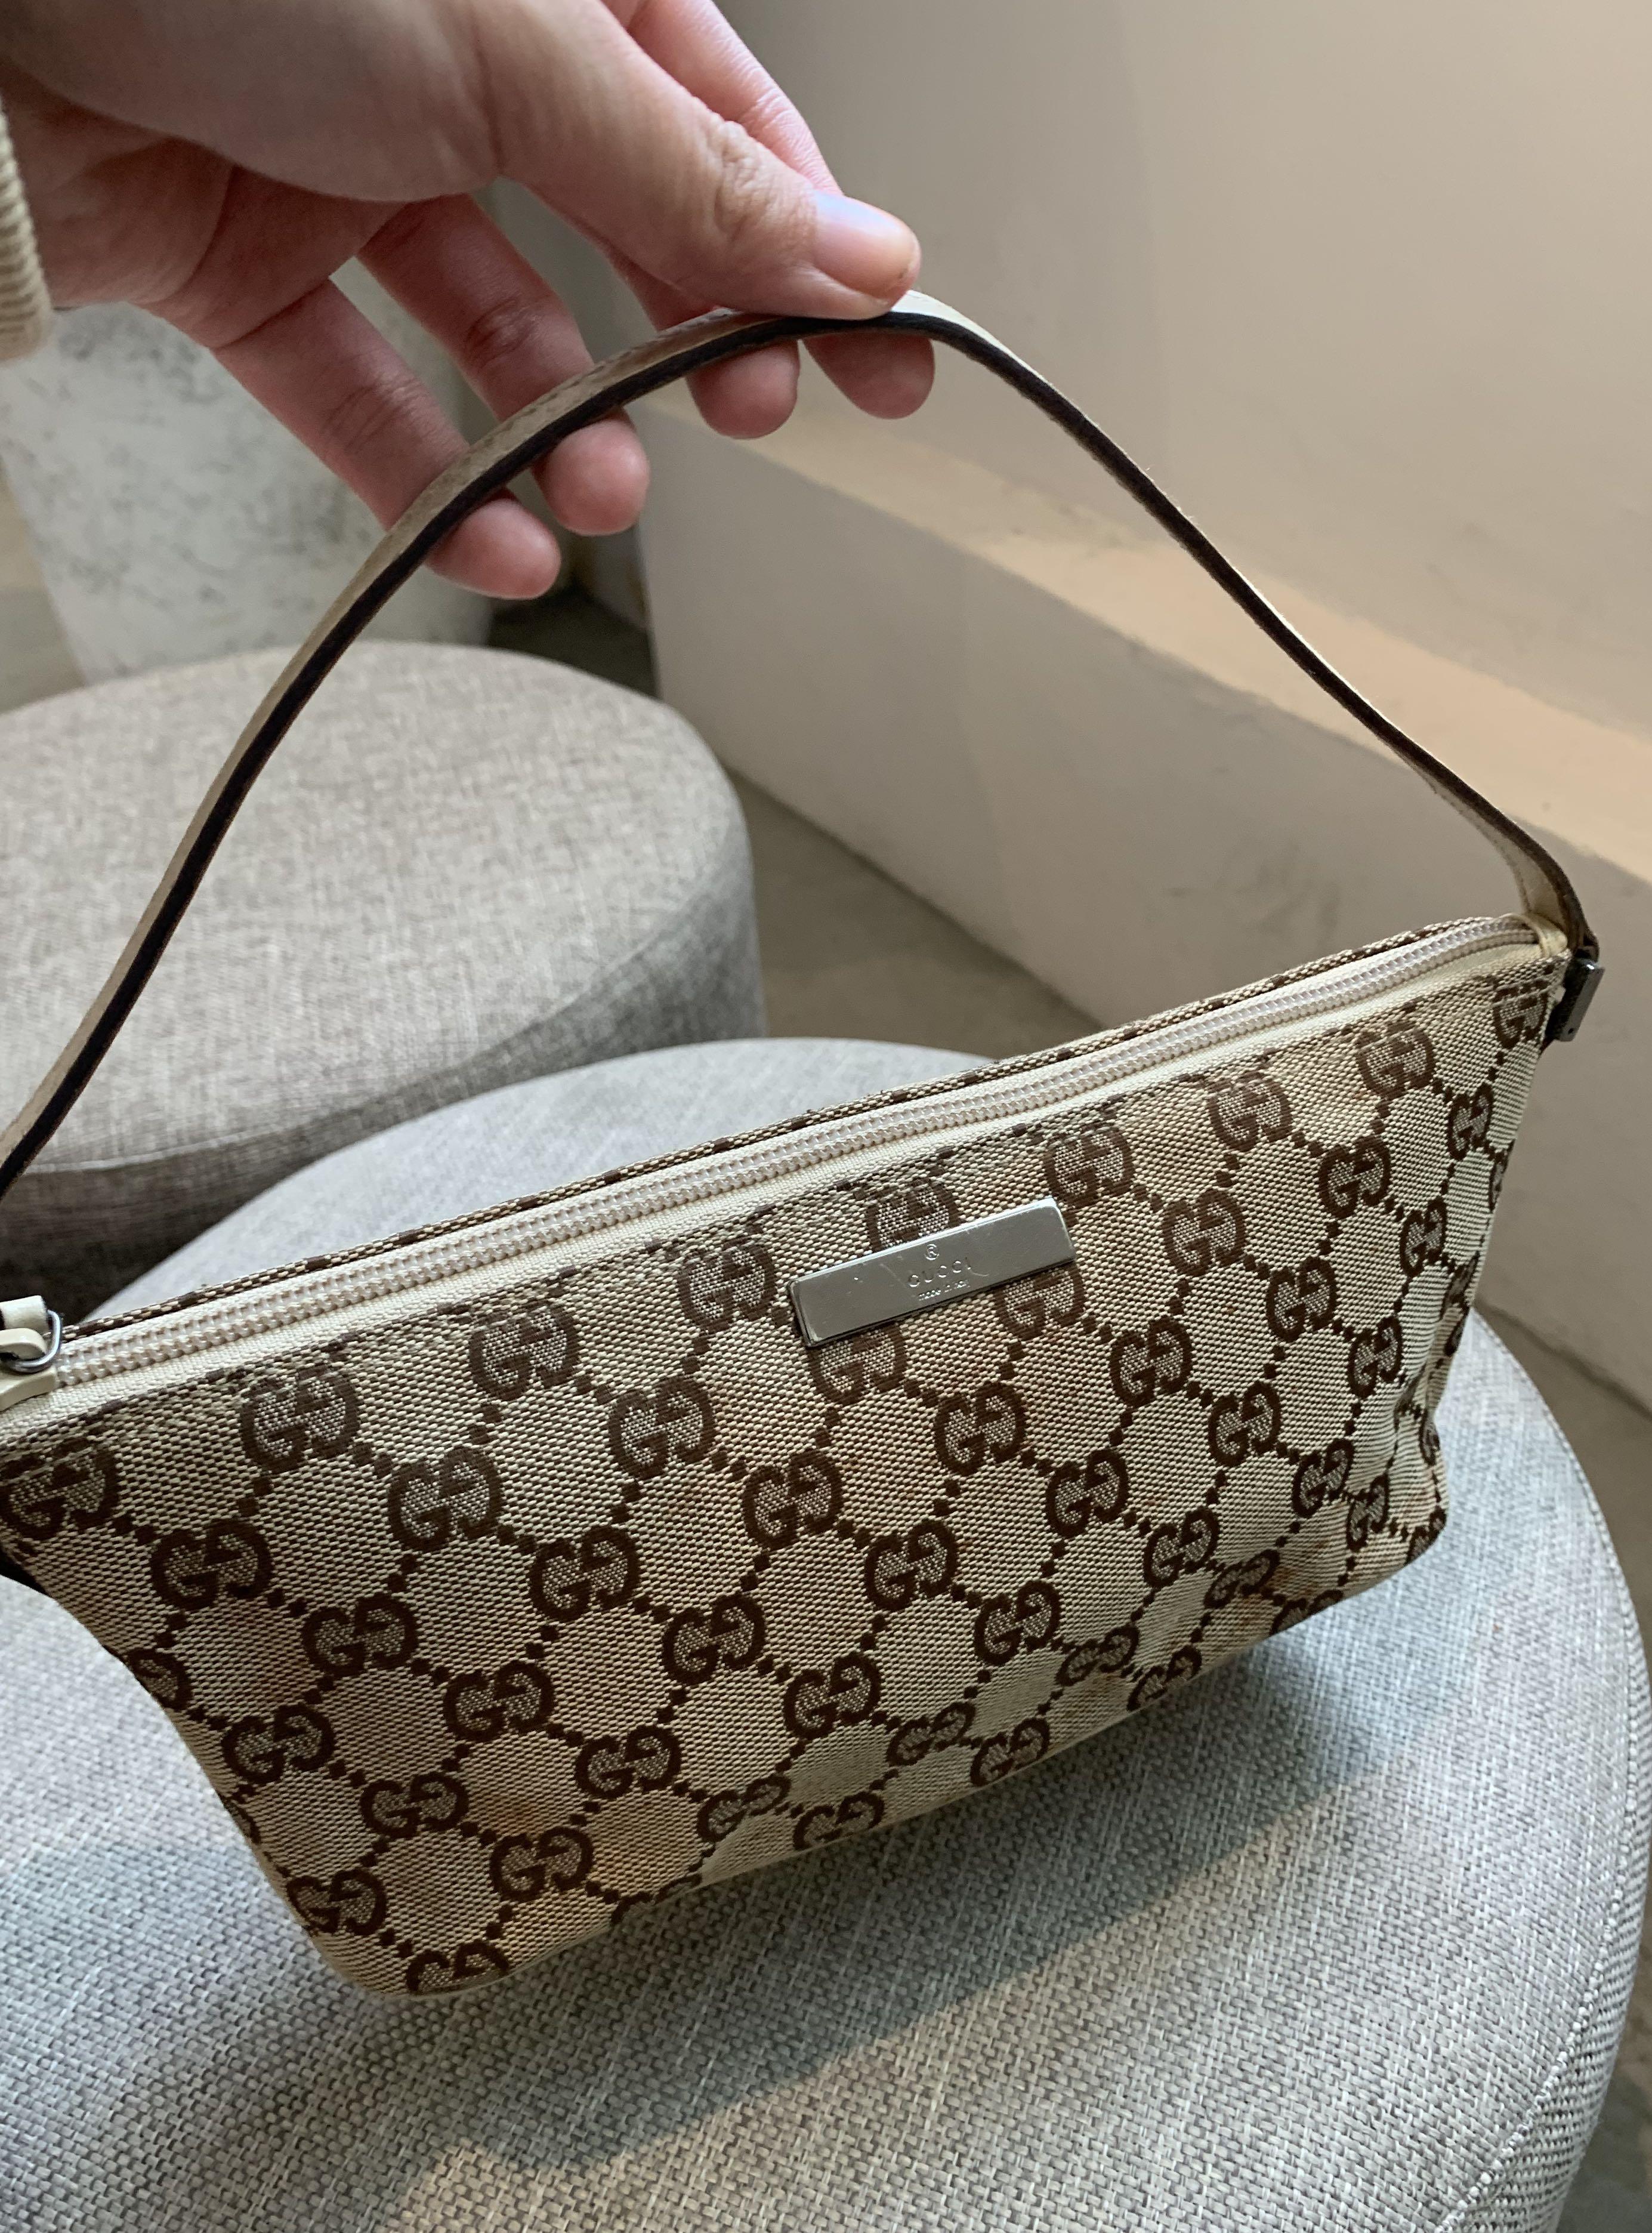 VINTAGE GUCCI BOAT POCHETTE, HOW MY OLDEST BAG HAS HELD UP AFTER 20 YEARS